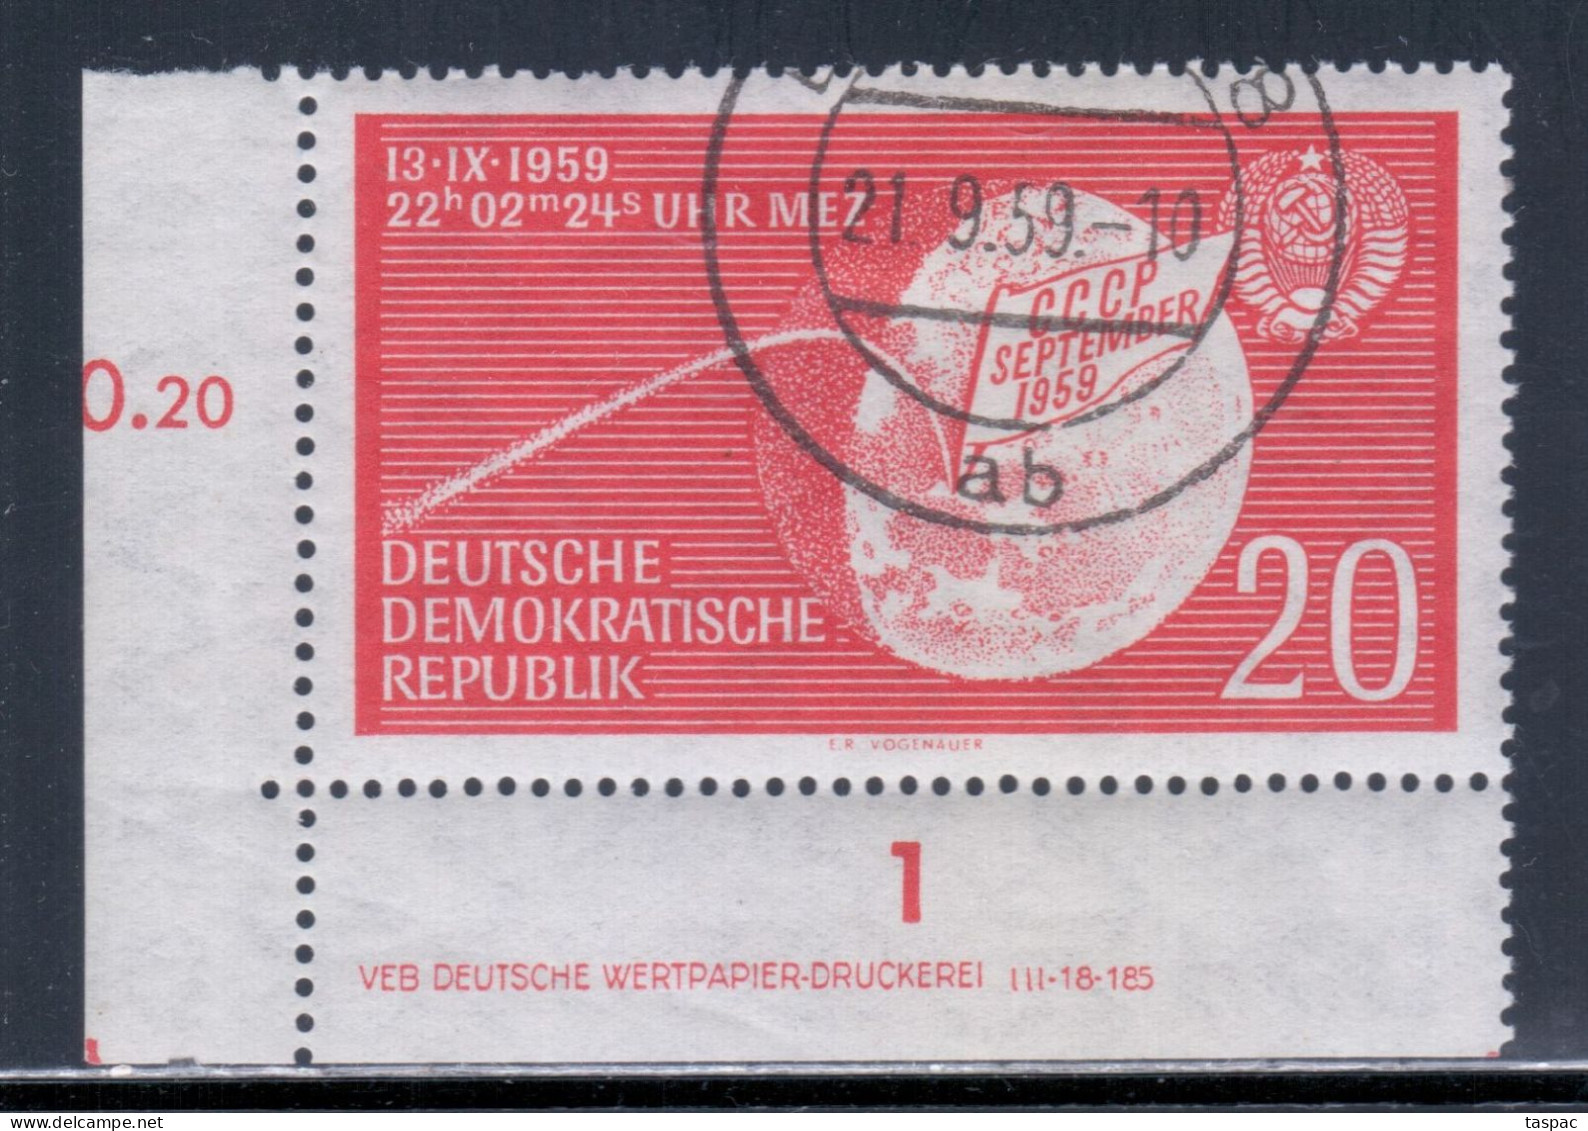 East Germany / DDR 1959 Mi# 721 DV Used - Landing Of The Soviet Rocket Lunik 2 On The Moon / Space - Used Stamps